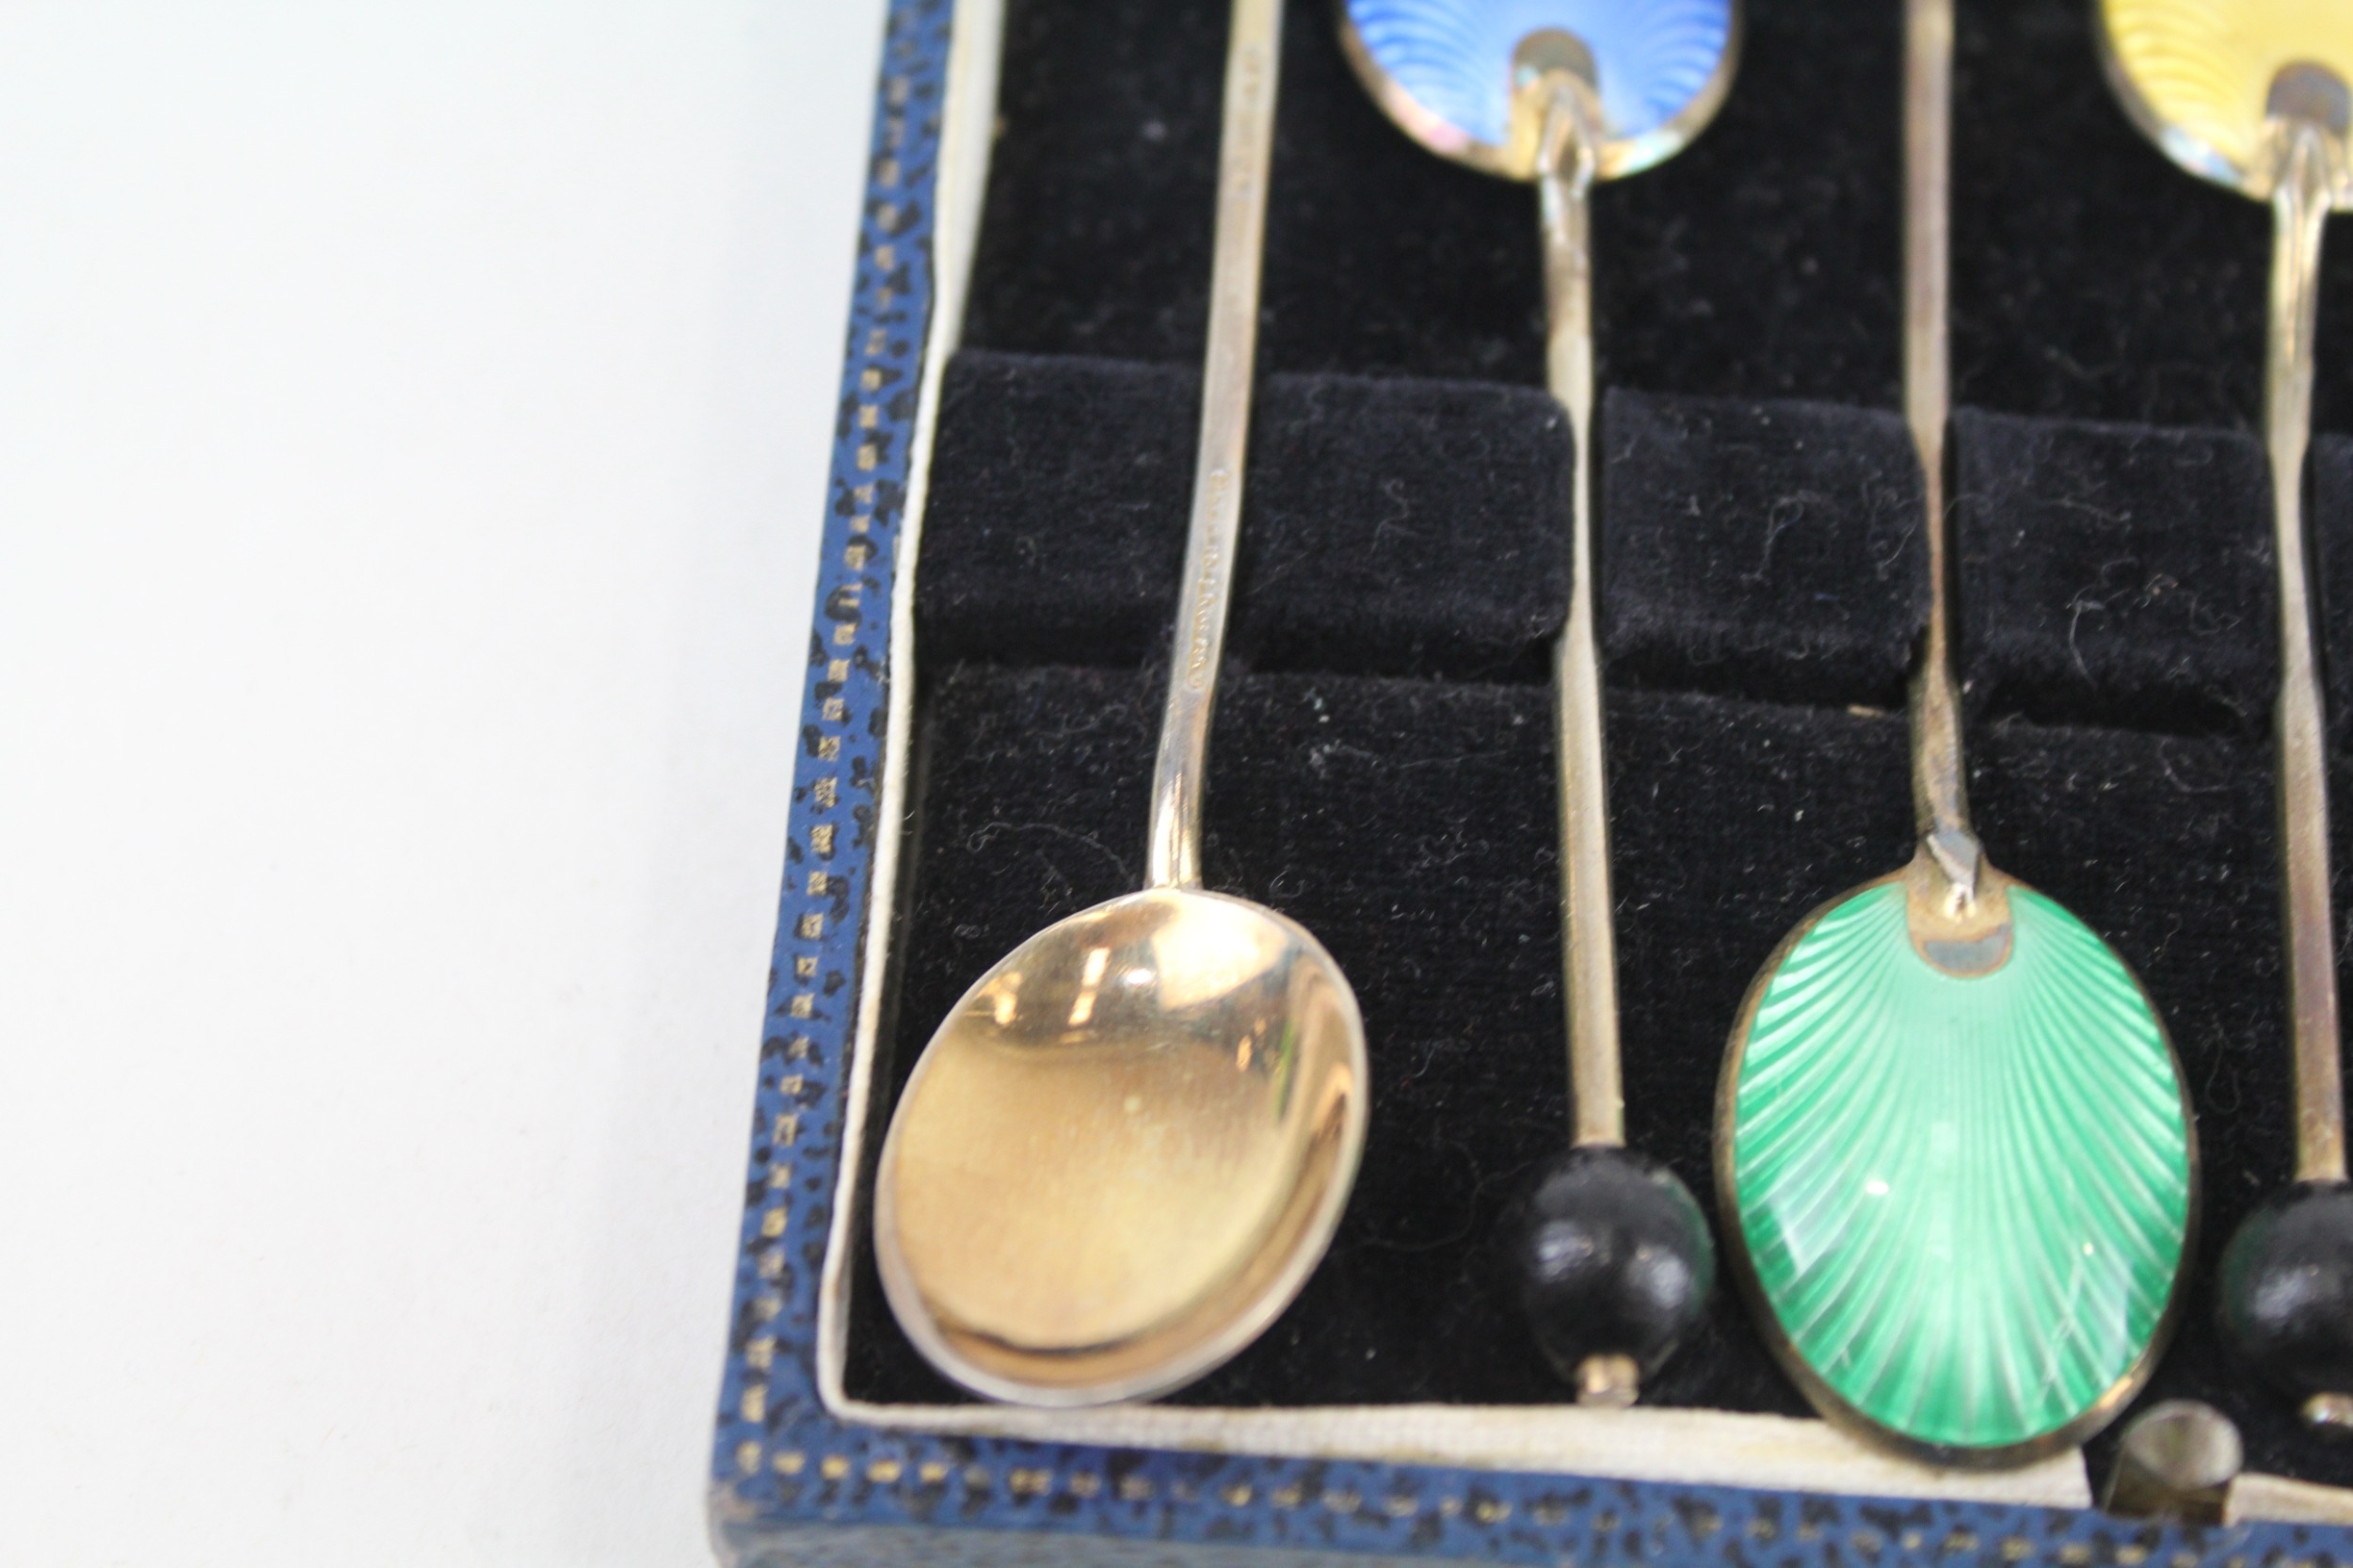 5 x .925 sterling guilloche enamel coffee bean spoons cased - Image 6 of 6